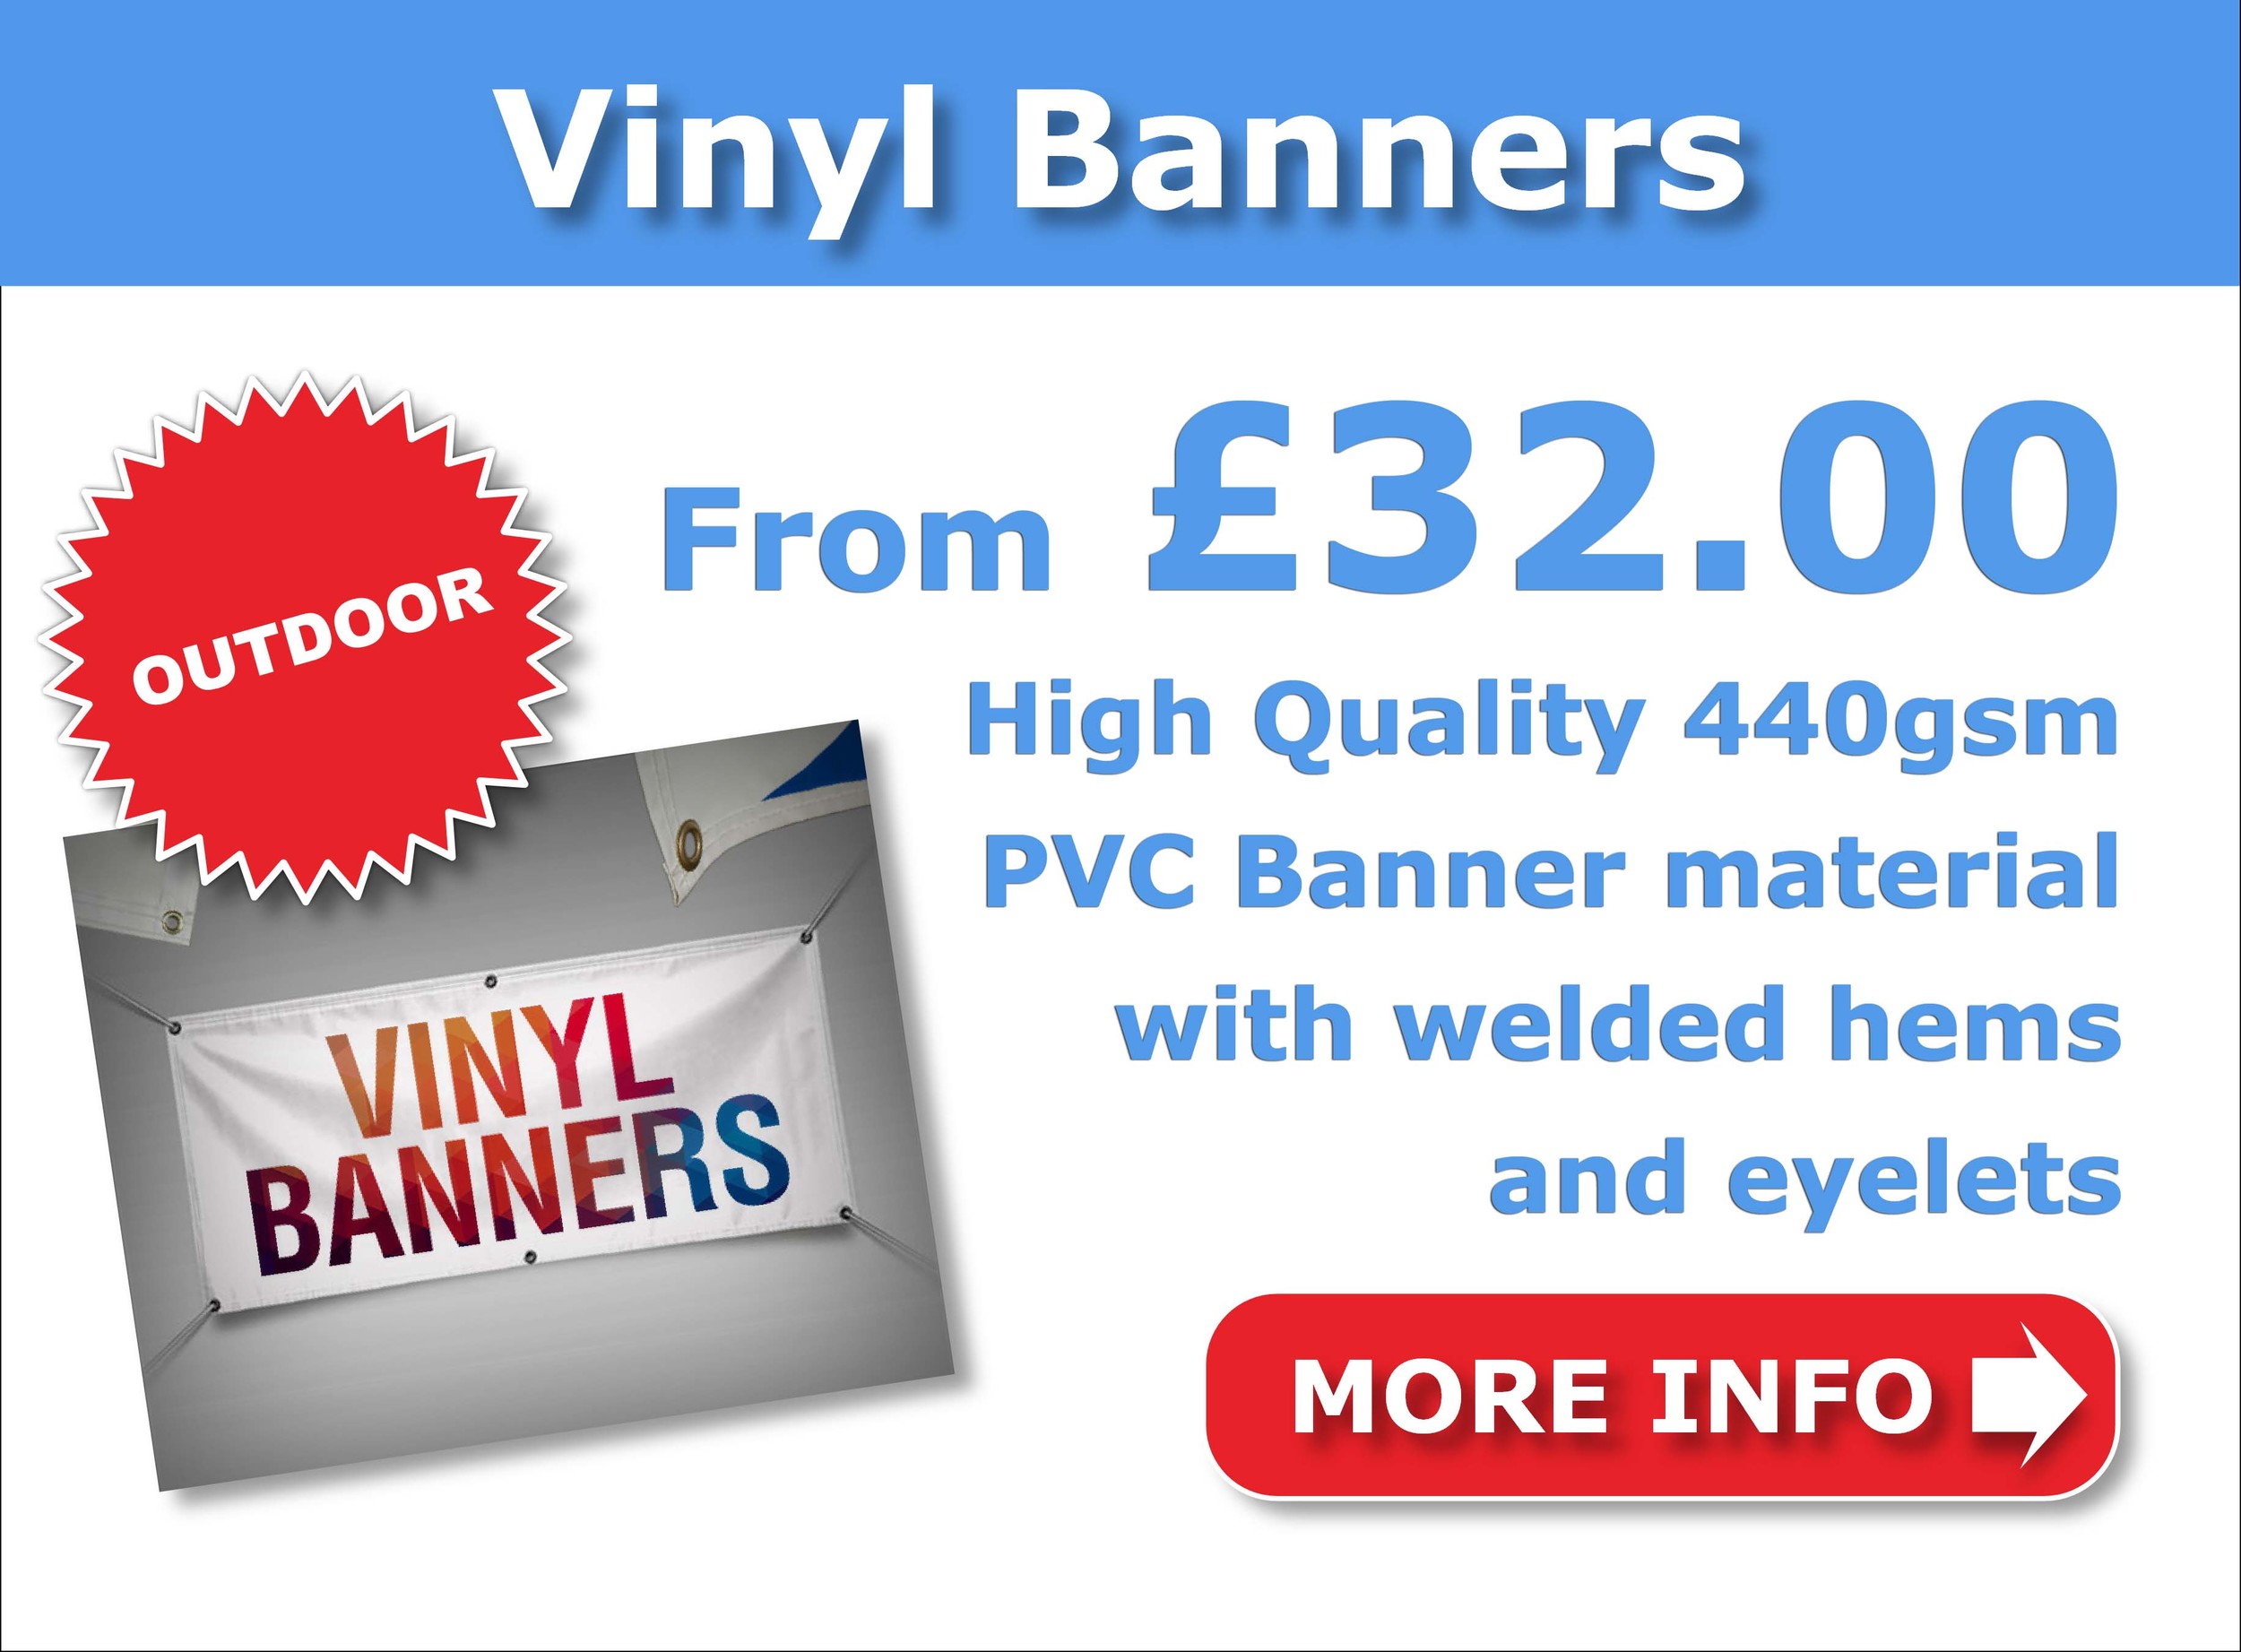 Vinyl Banners from £32.00